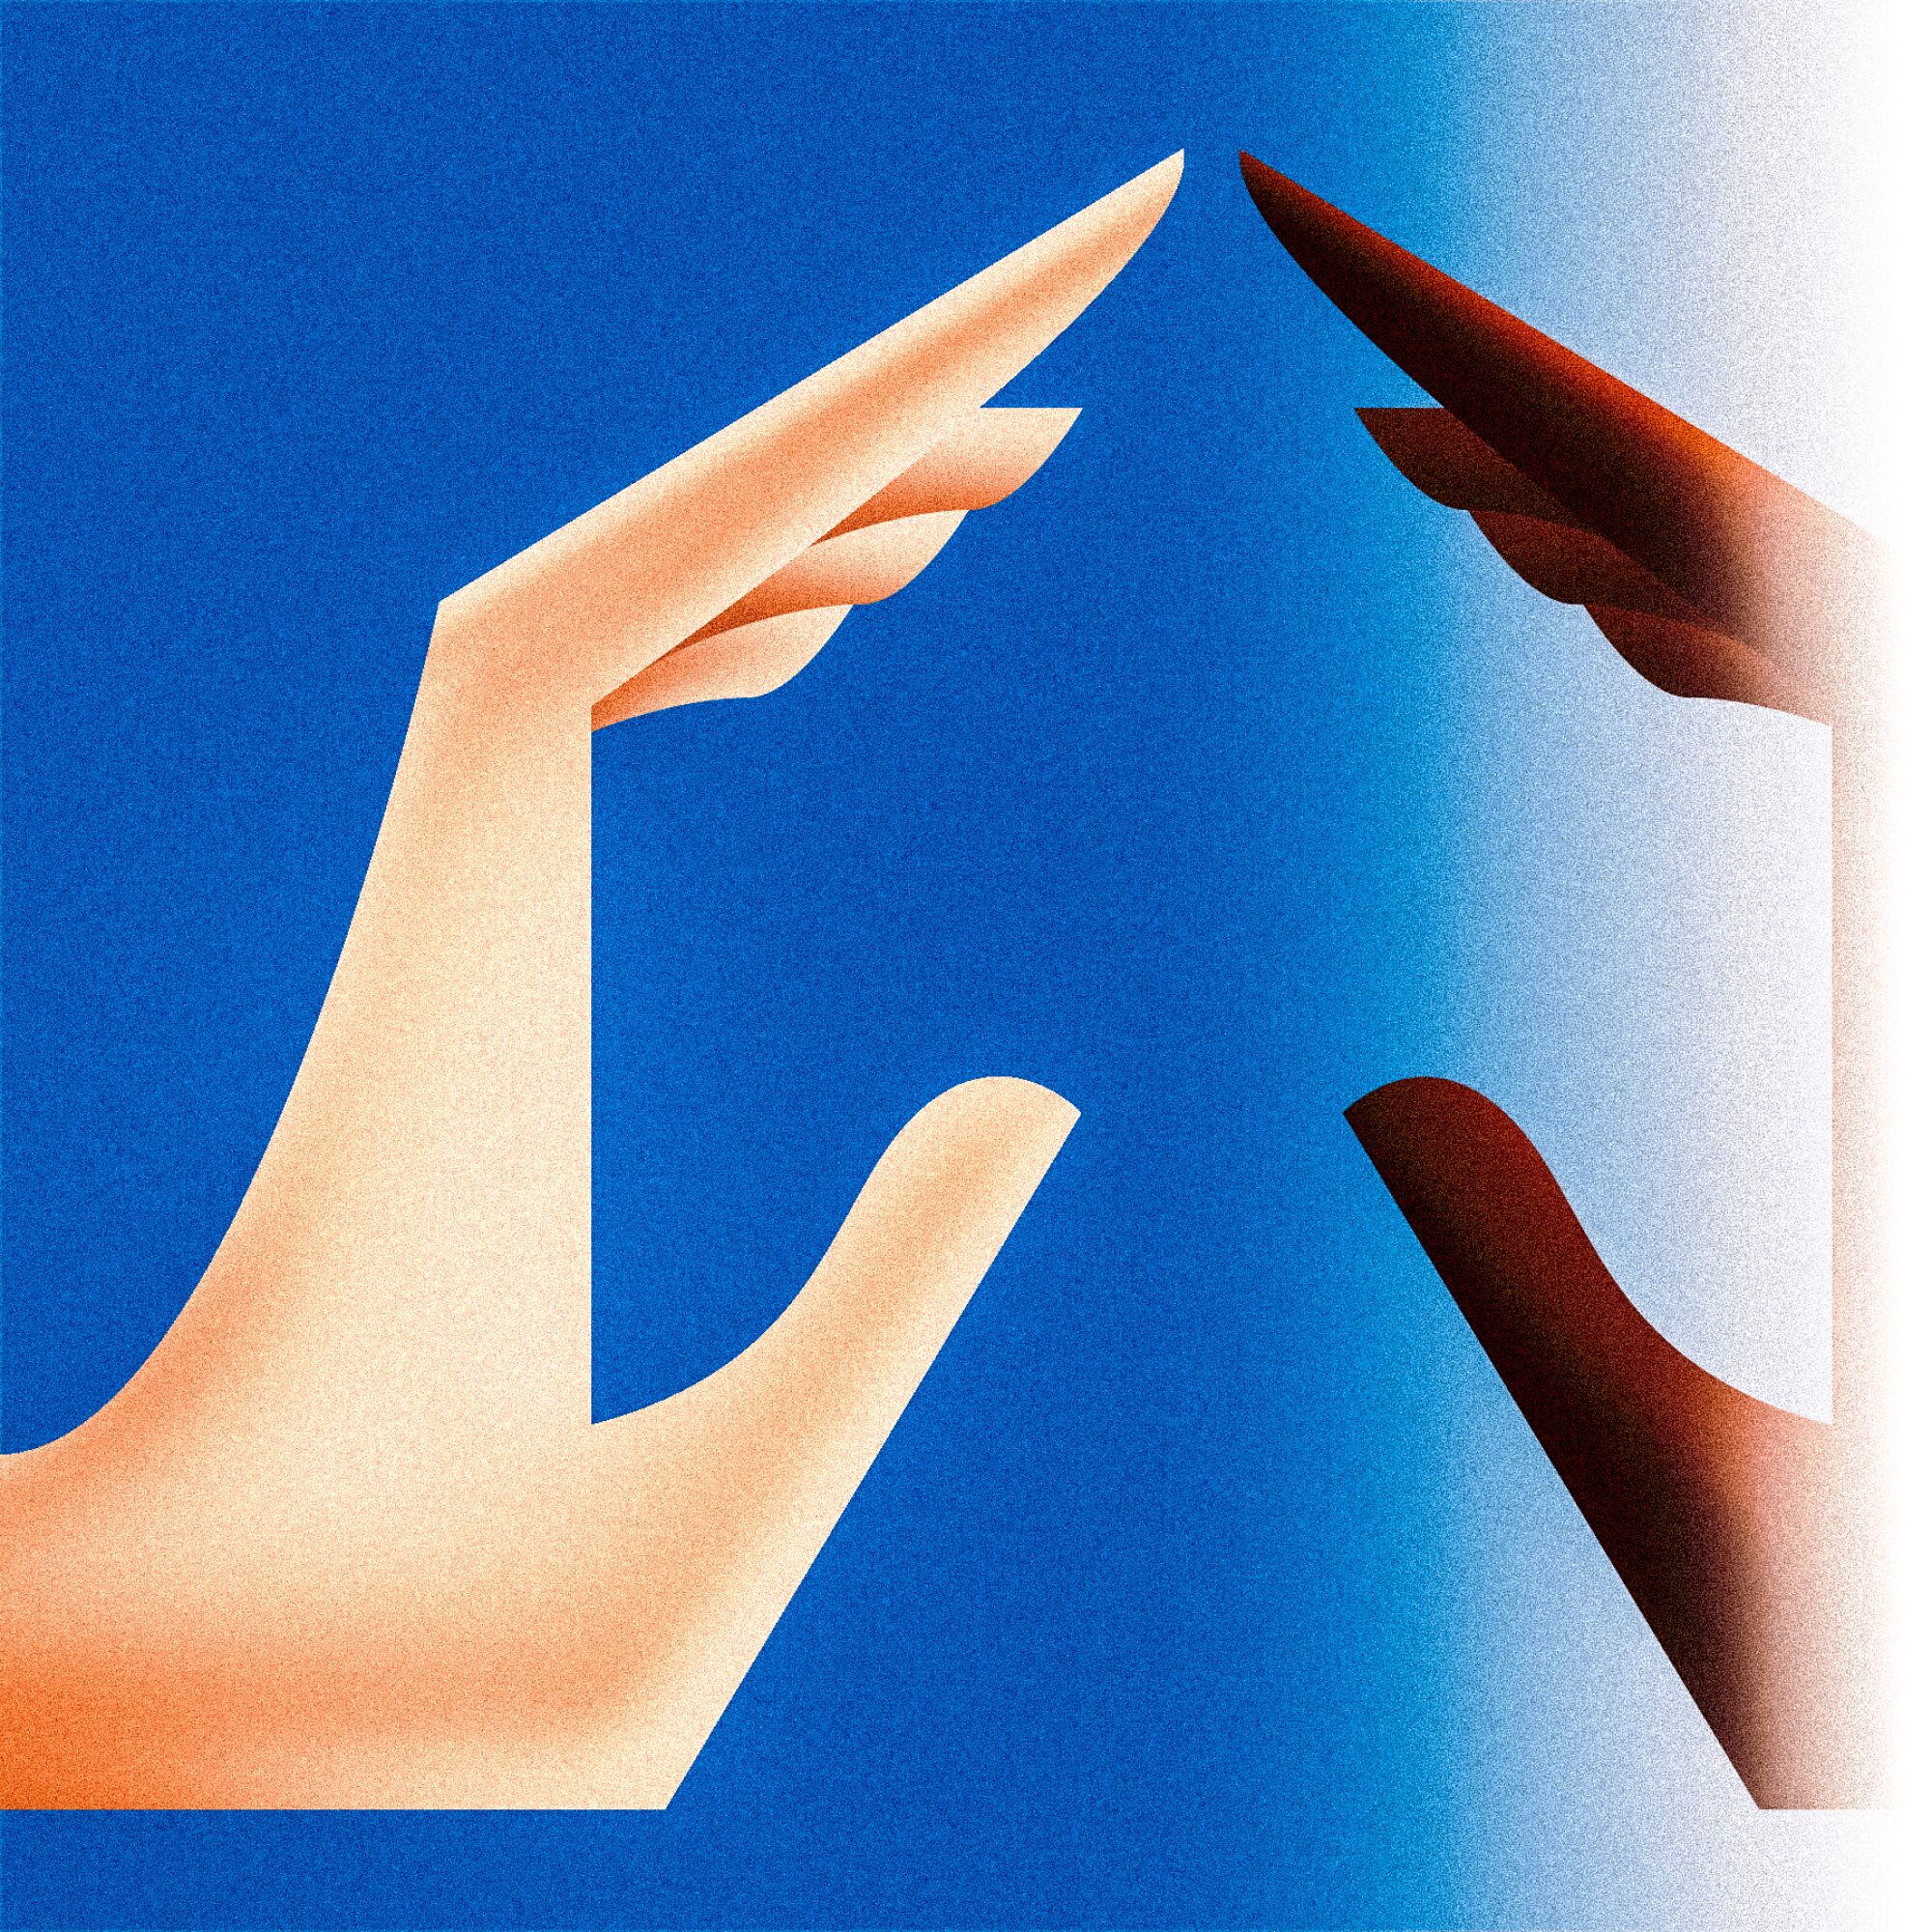 Illustration of two hands reaching out to each other. The left hand is light skin toned; the right hand is dark skin toned.